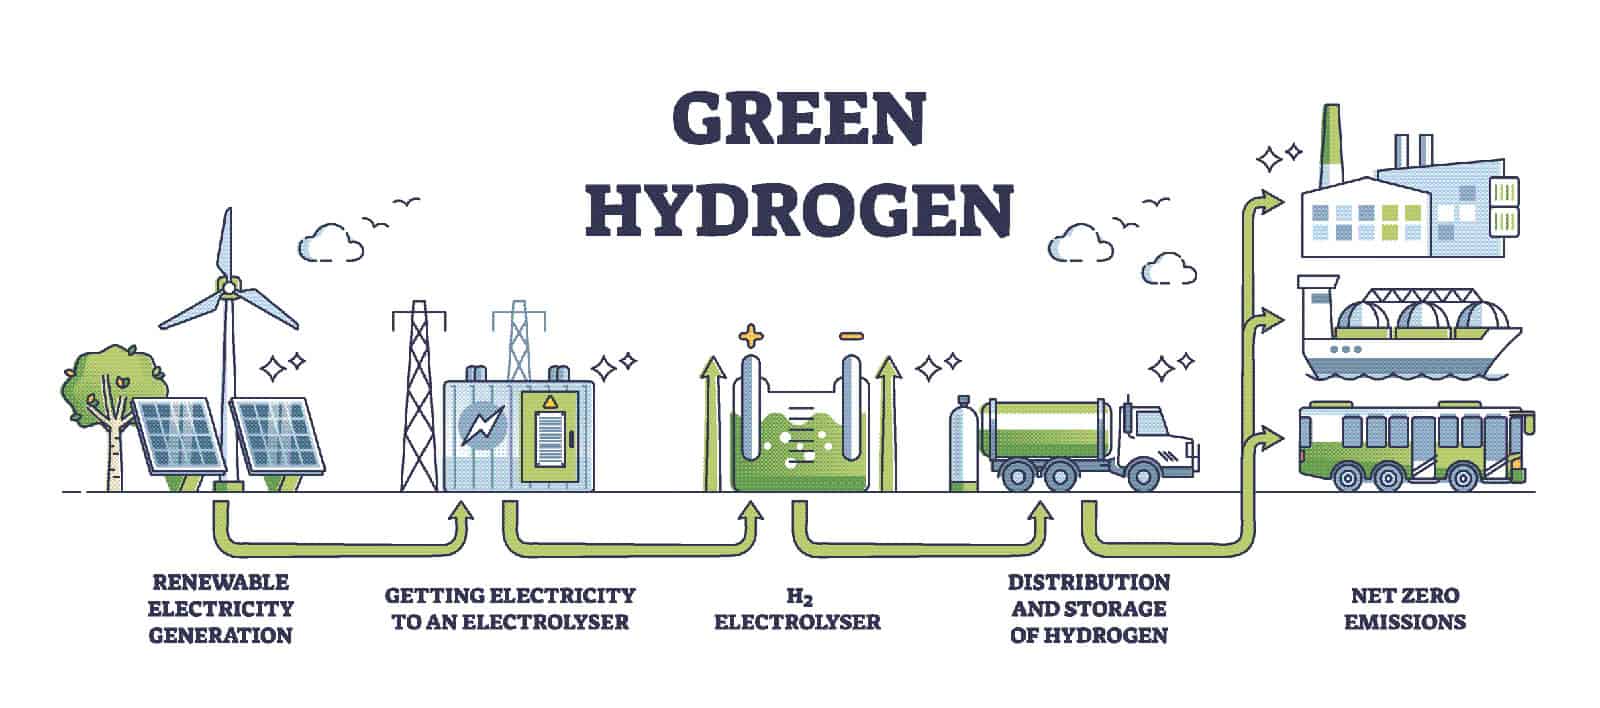 Green Hydrogen Lifecycle